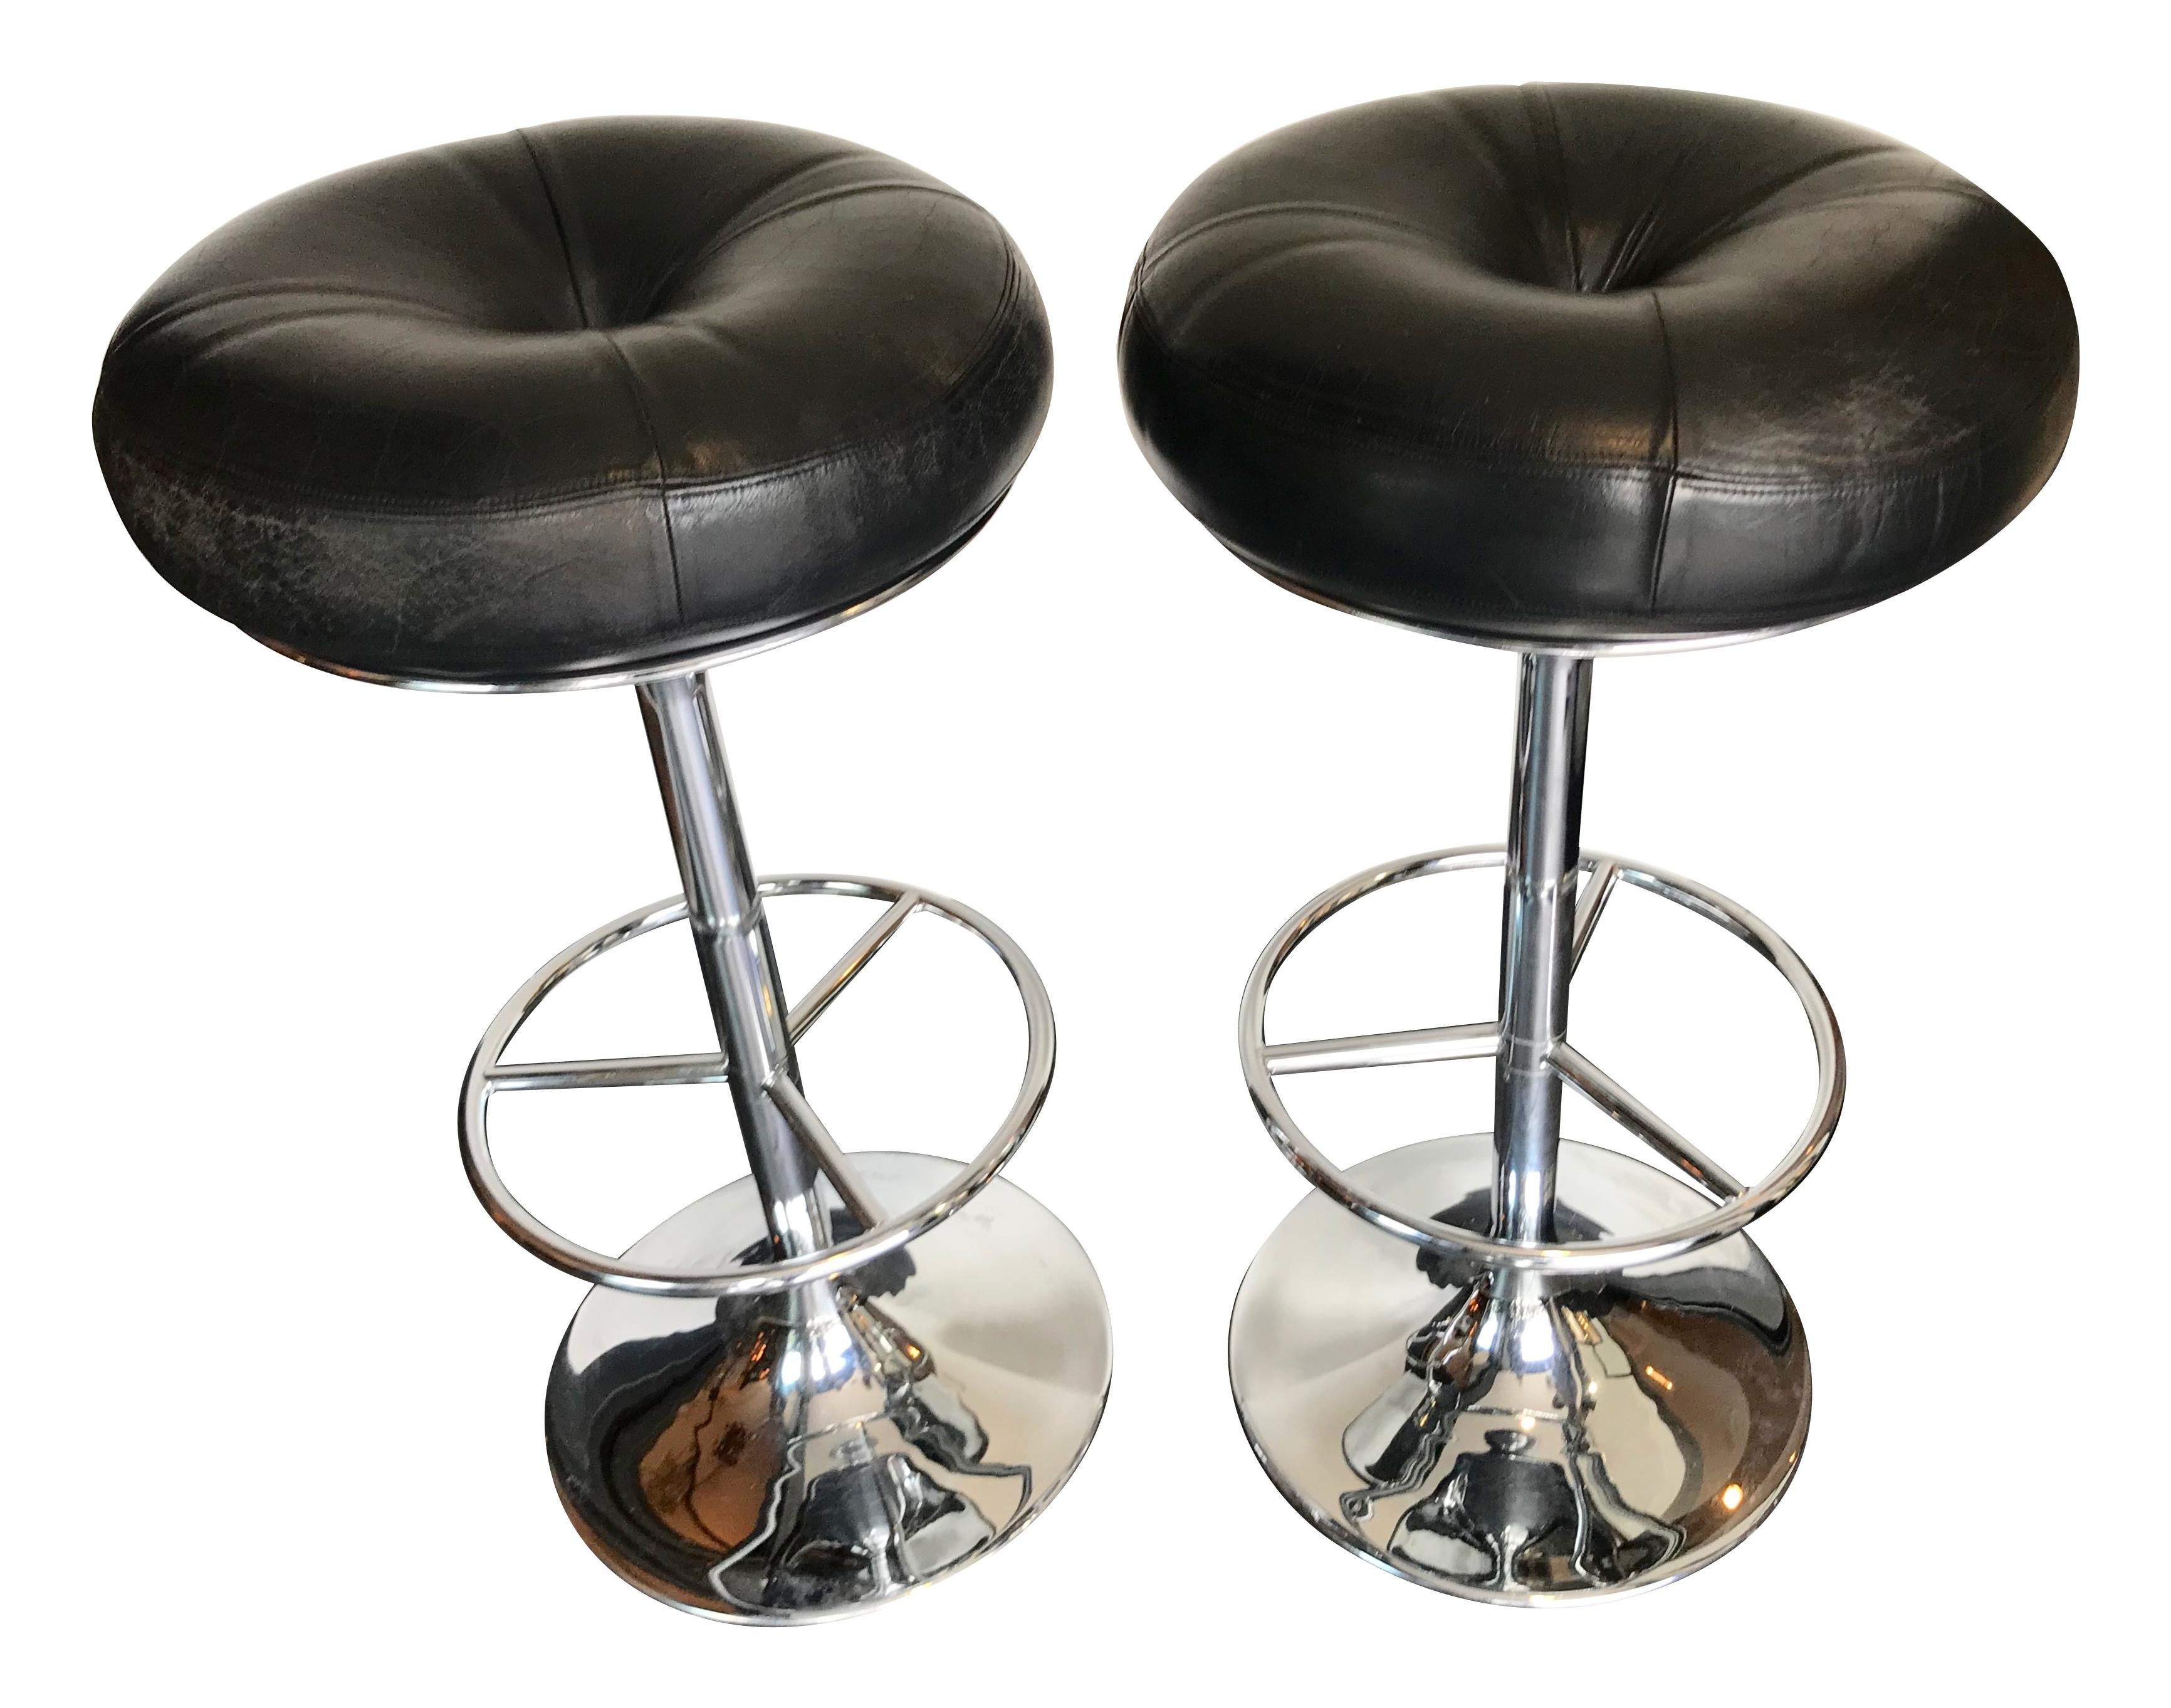 Set of 4 1970s Chrome and Black Leather Bar Stools by Johanson Design, Sweden 3